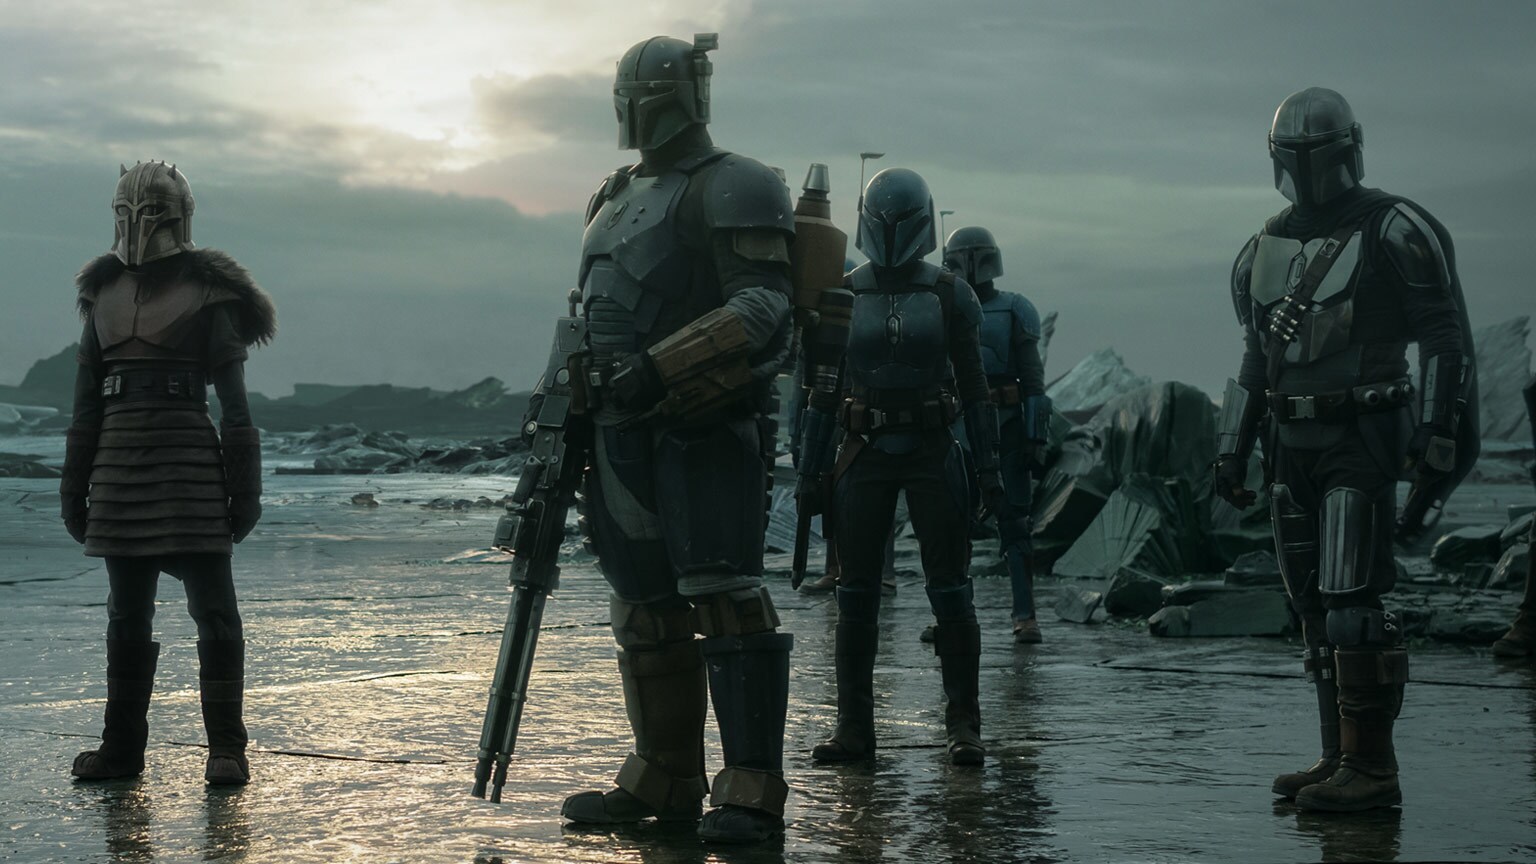 Bounty Hunting Highlights: 5 of Our Favorite Moments from The Mandalorian - “Chapter 23: The Spies”